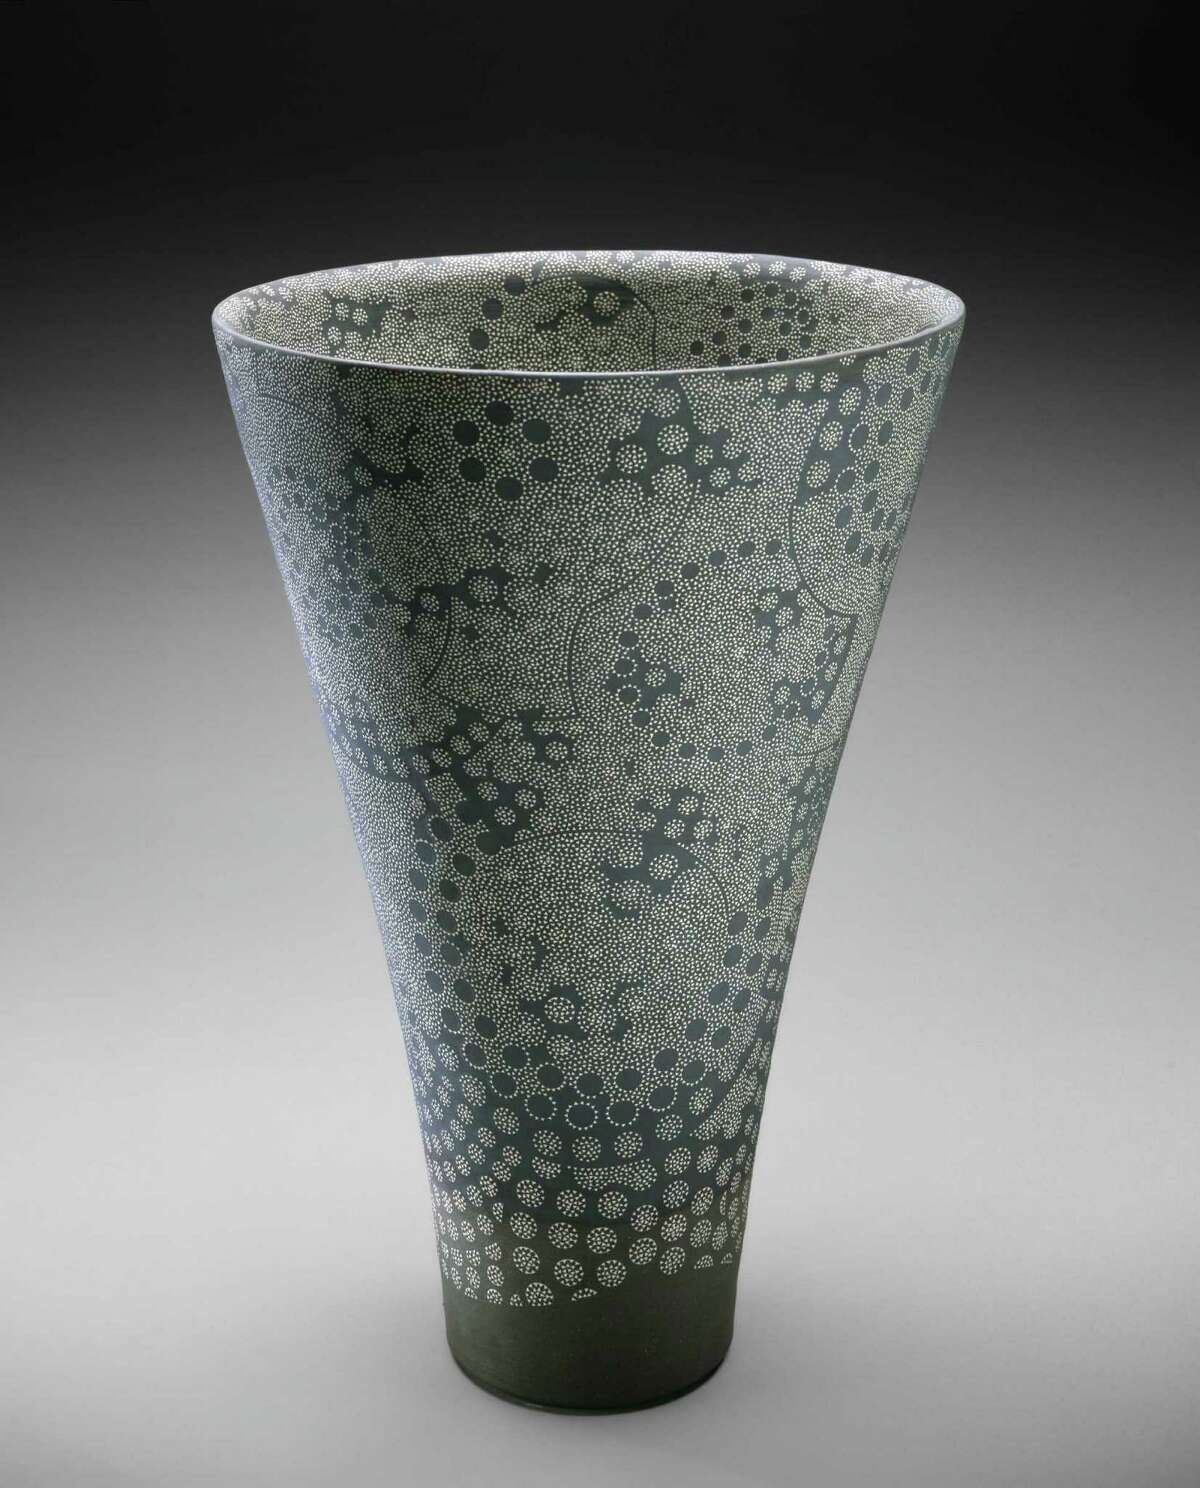 Kitamura Junko's "Tall Open Vessel" was among the objects shown last year in "Shifting Paradigms: Contemporary Ceramics from the Garth Clark and Mark Del Vecchio Collection" at the Museum of Fine Arts, Houston.